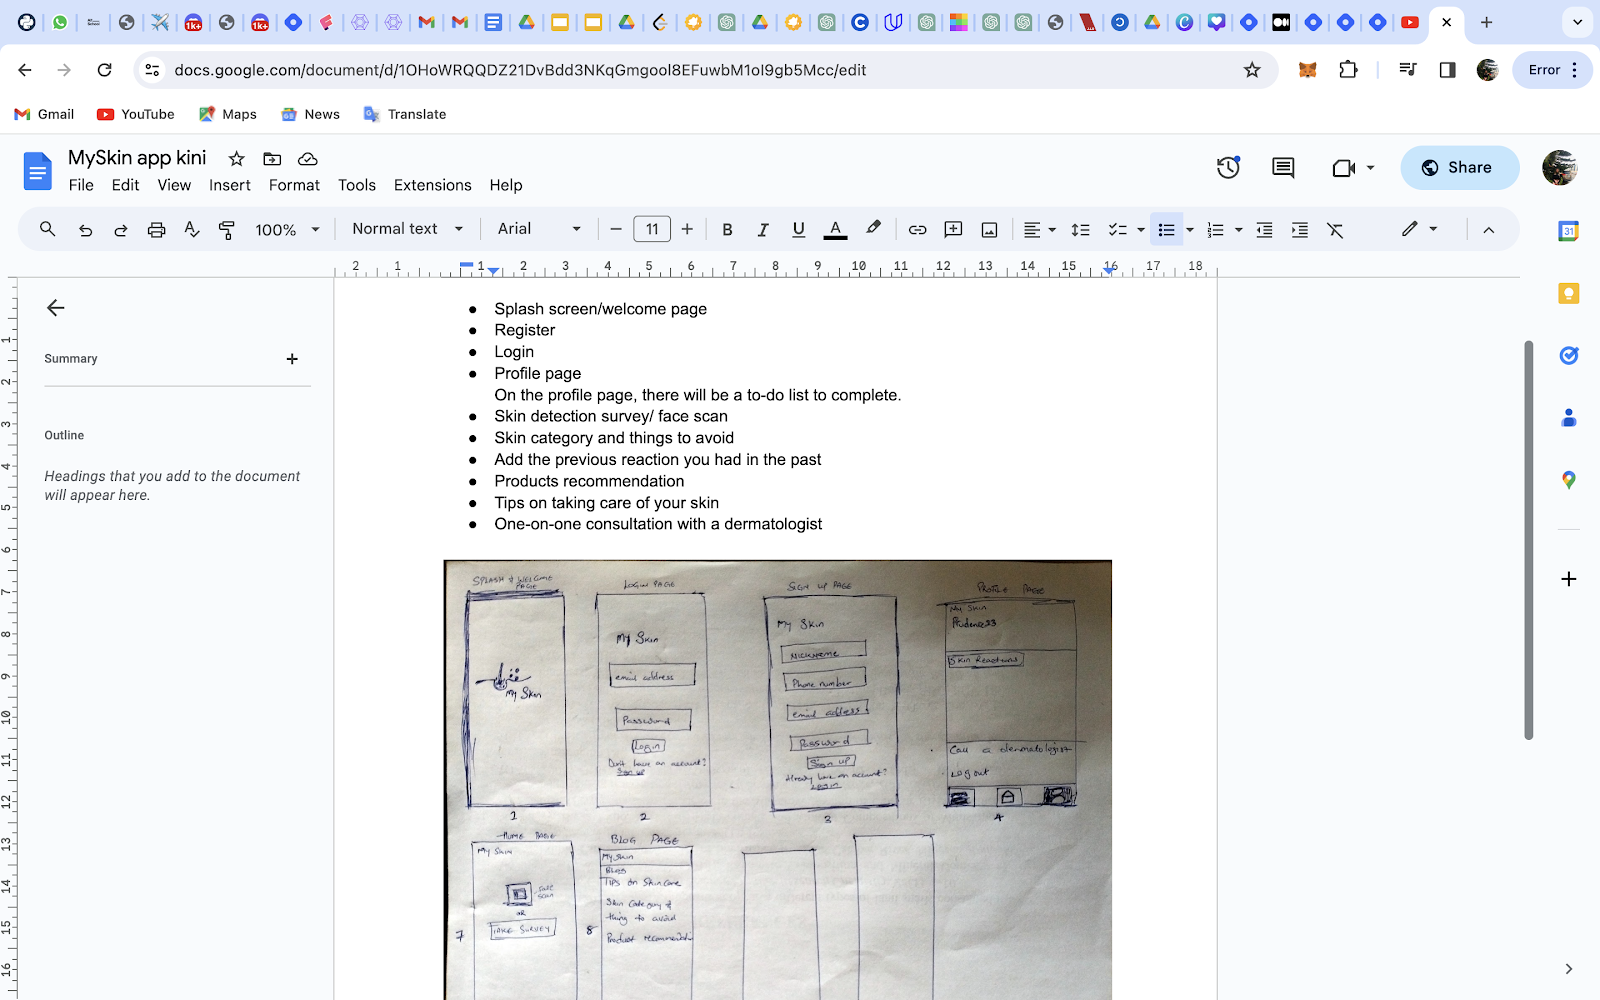 An image showing an initial sketch of what the app will look like